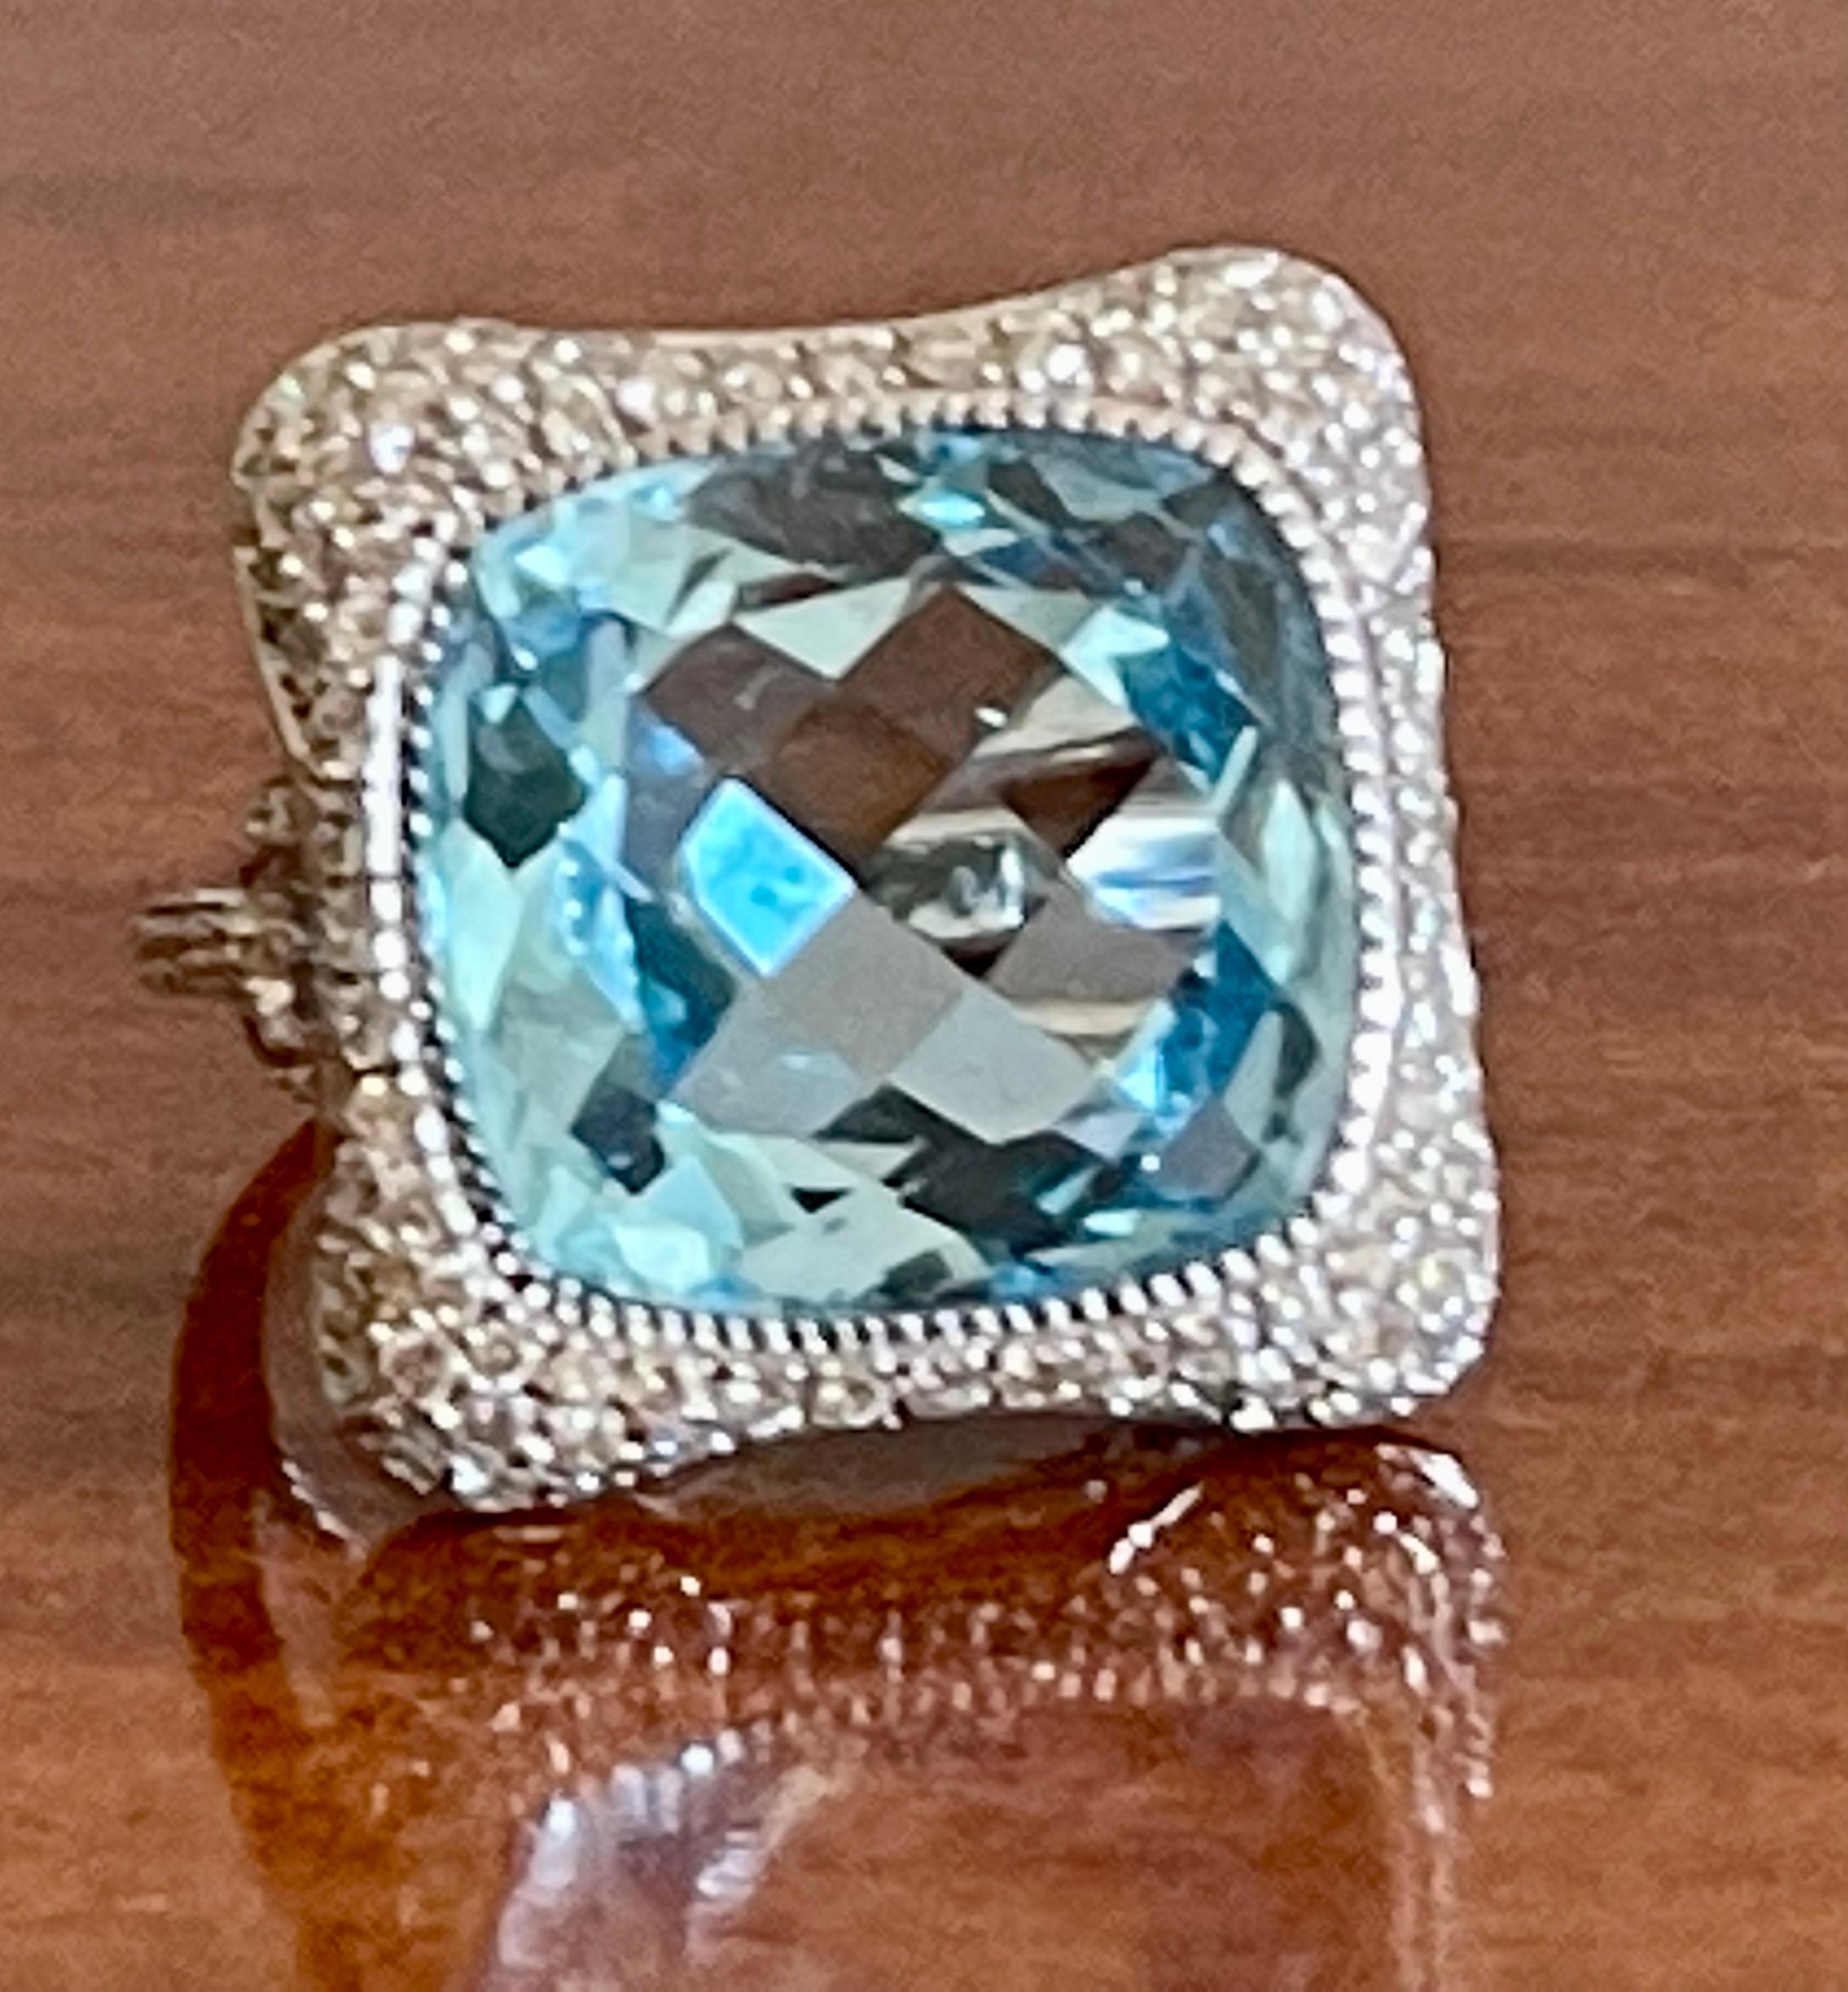 Exquisite cocktail ring crafted in 18 karat white gold showcasing a spectacular fantasy cushion cut sky blue Topaz weighing 16.88 carats. The Topaz is framed with 115 brilliant cut Diamonds weighing 1.04 ct, G color, vs clarity. The face of this